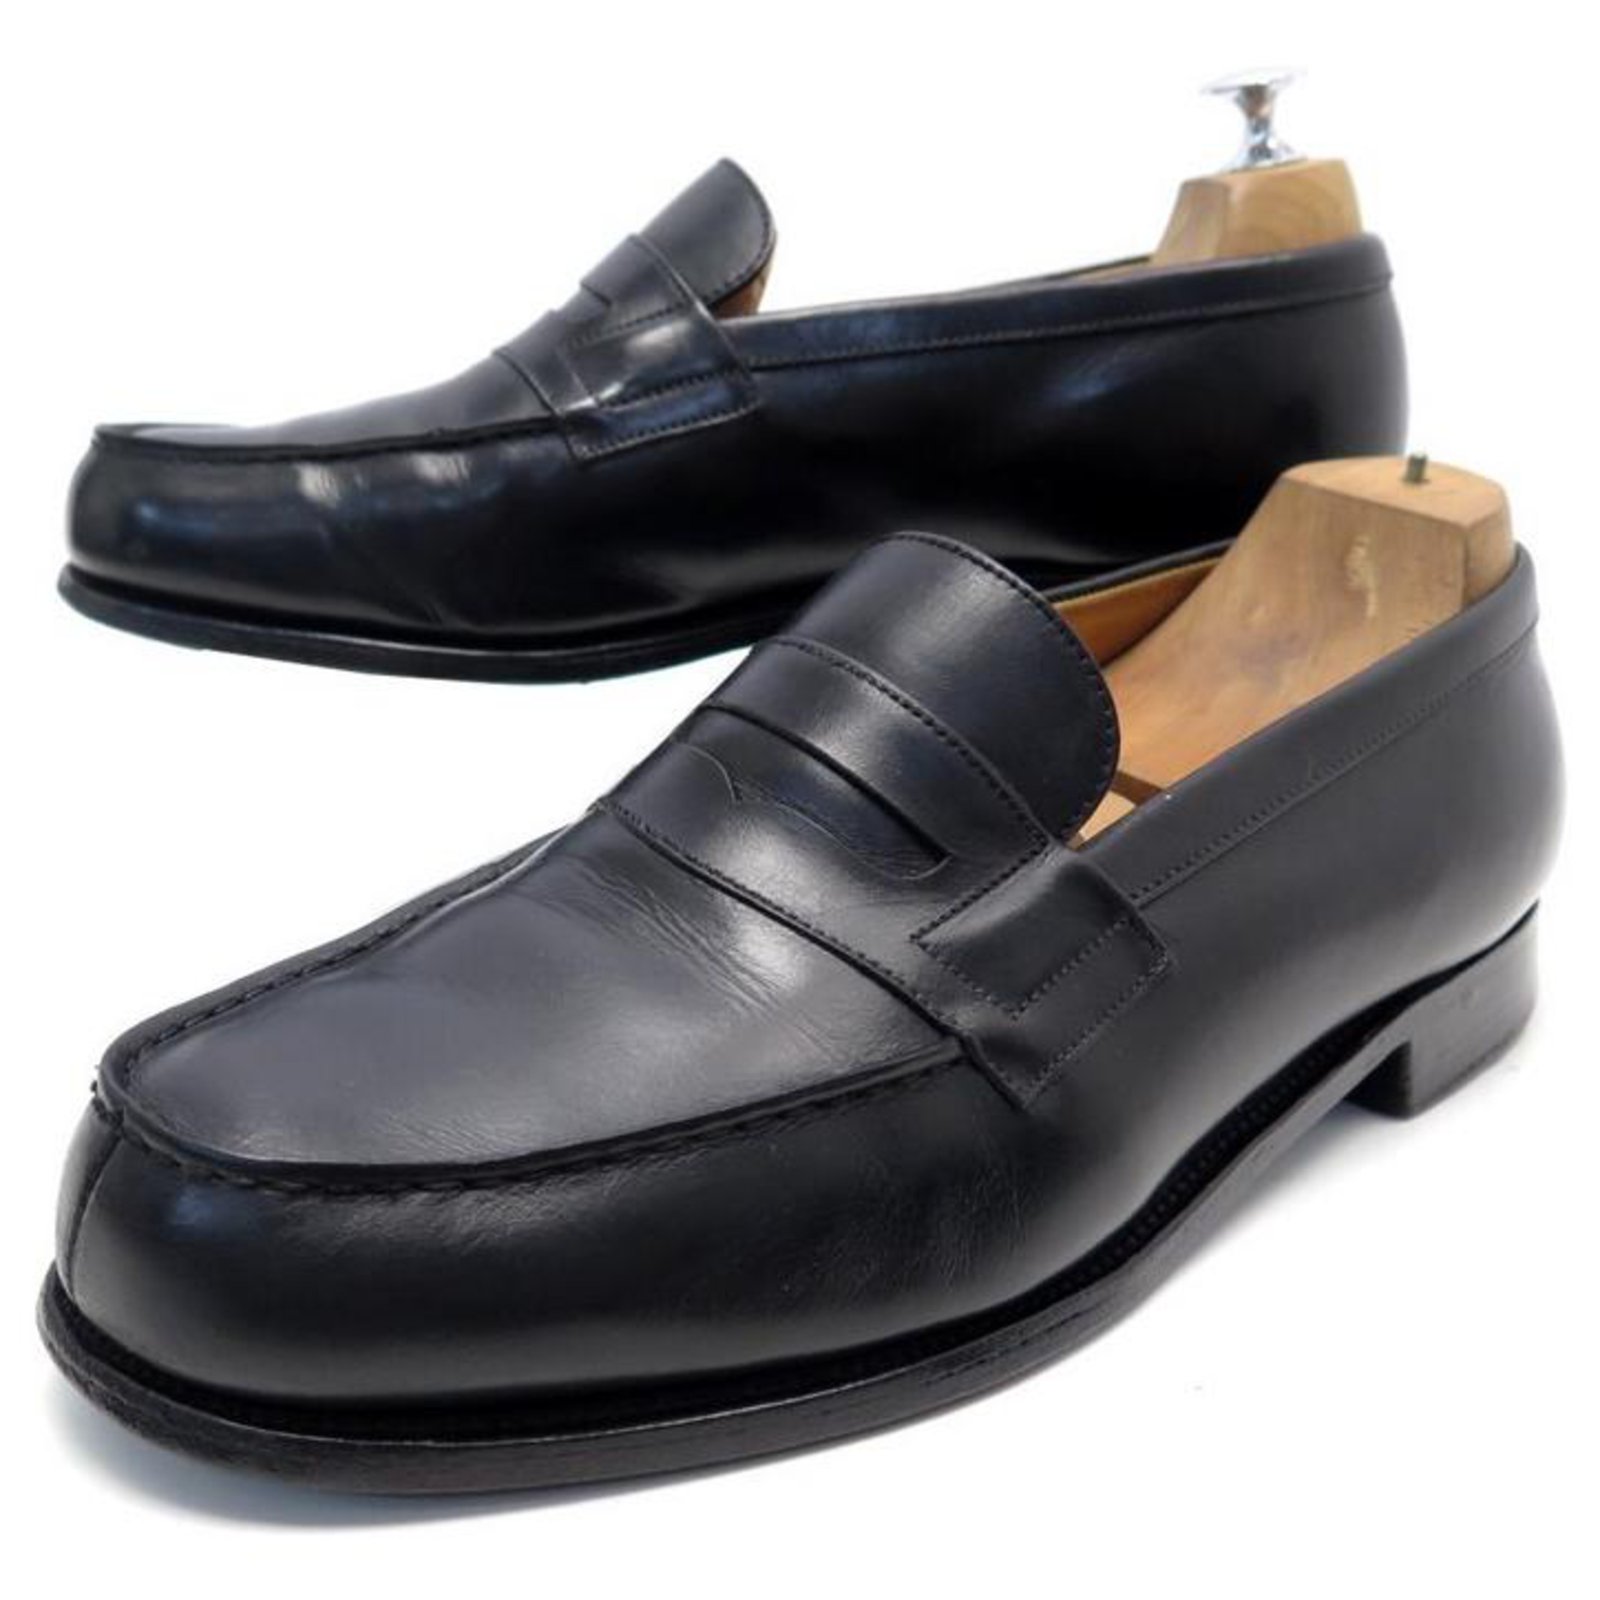 JM WESTON LOAFERS 180 8F 42 LARGE BLACK LEATHER LOAFFERS SHOES